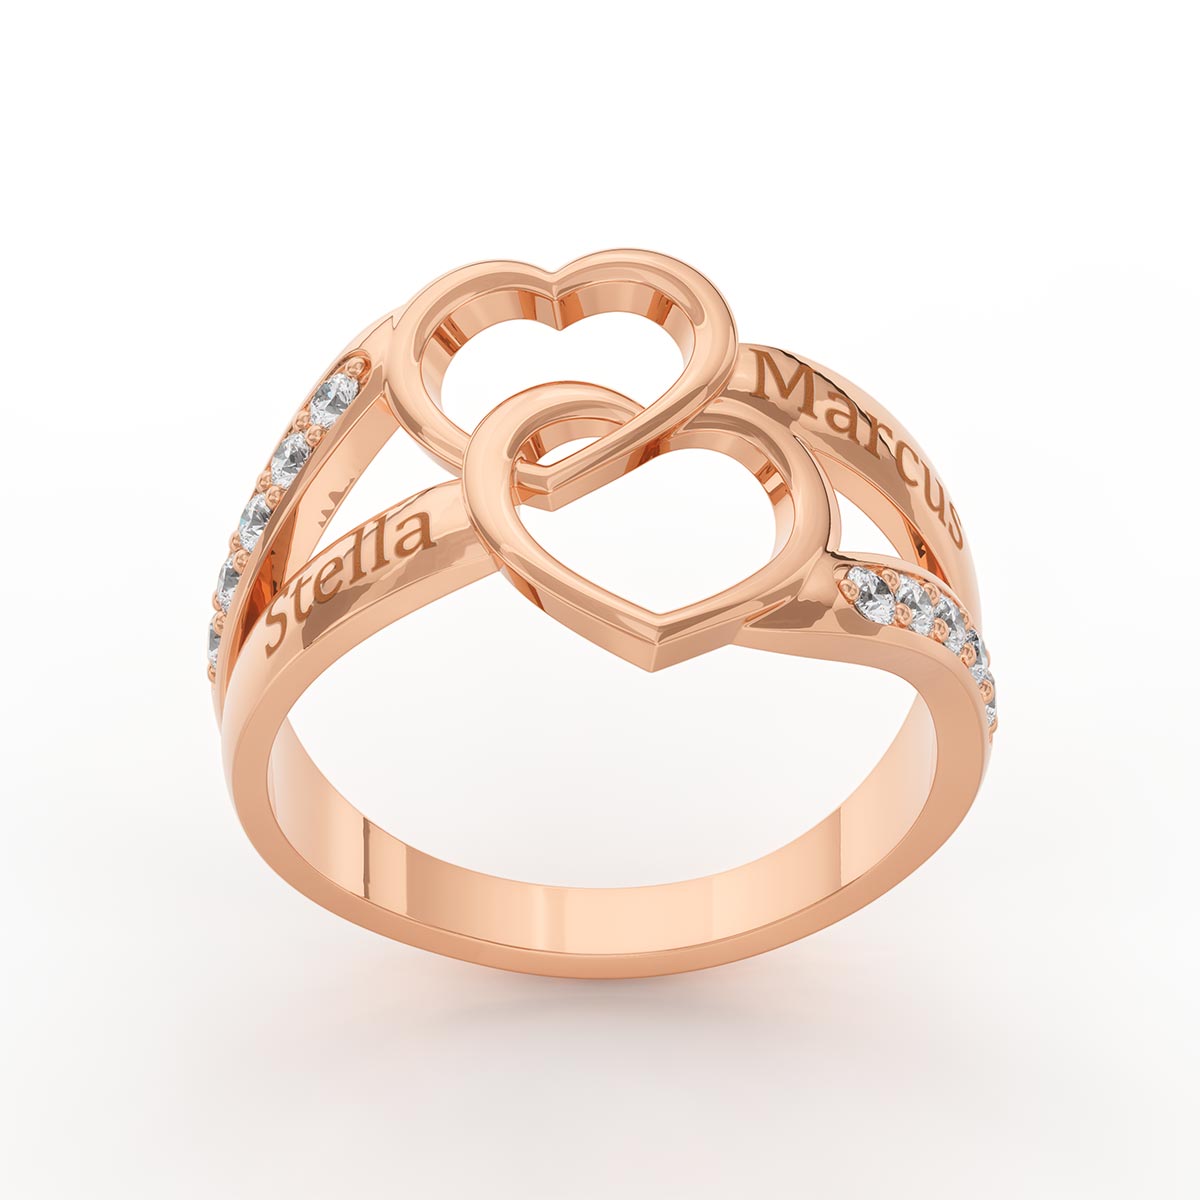 Personalized Interlocking Hearts Ring with Stones